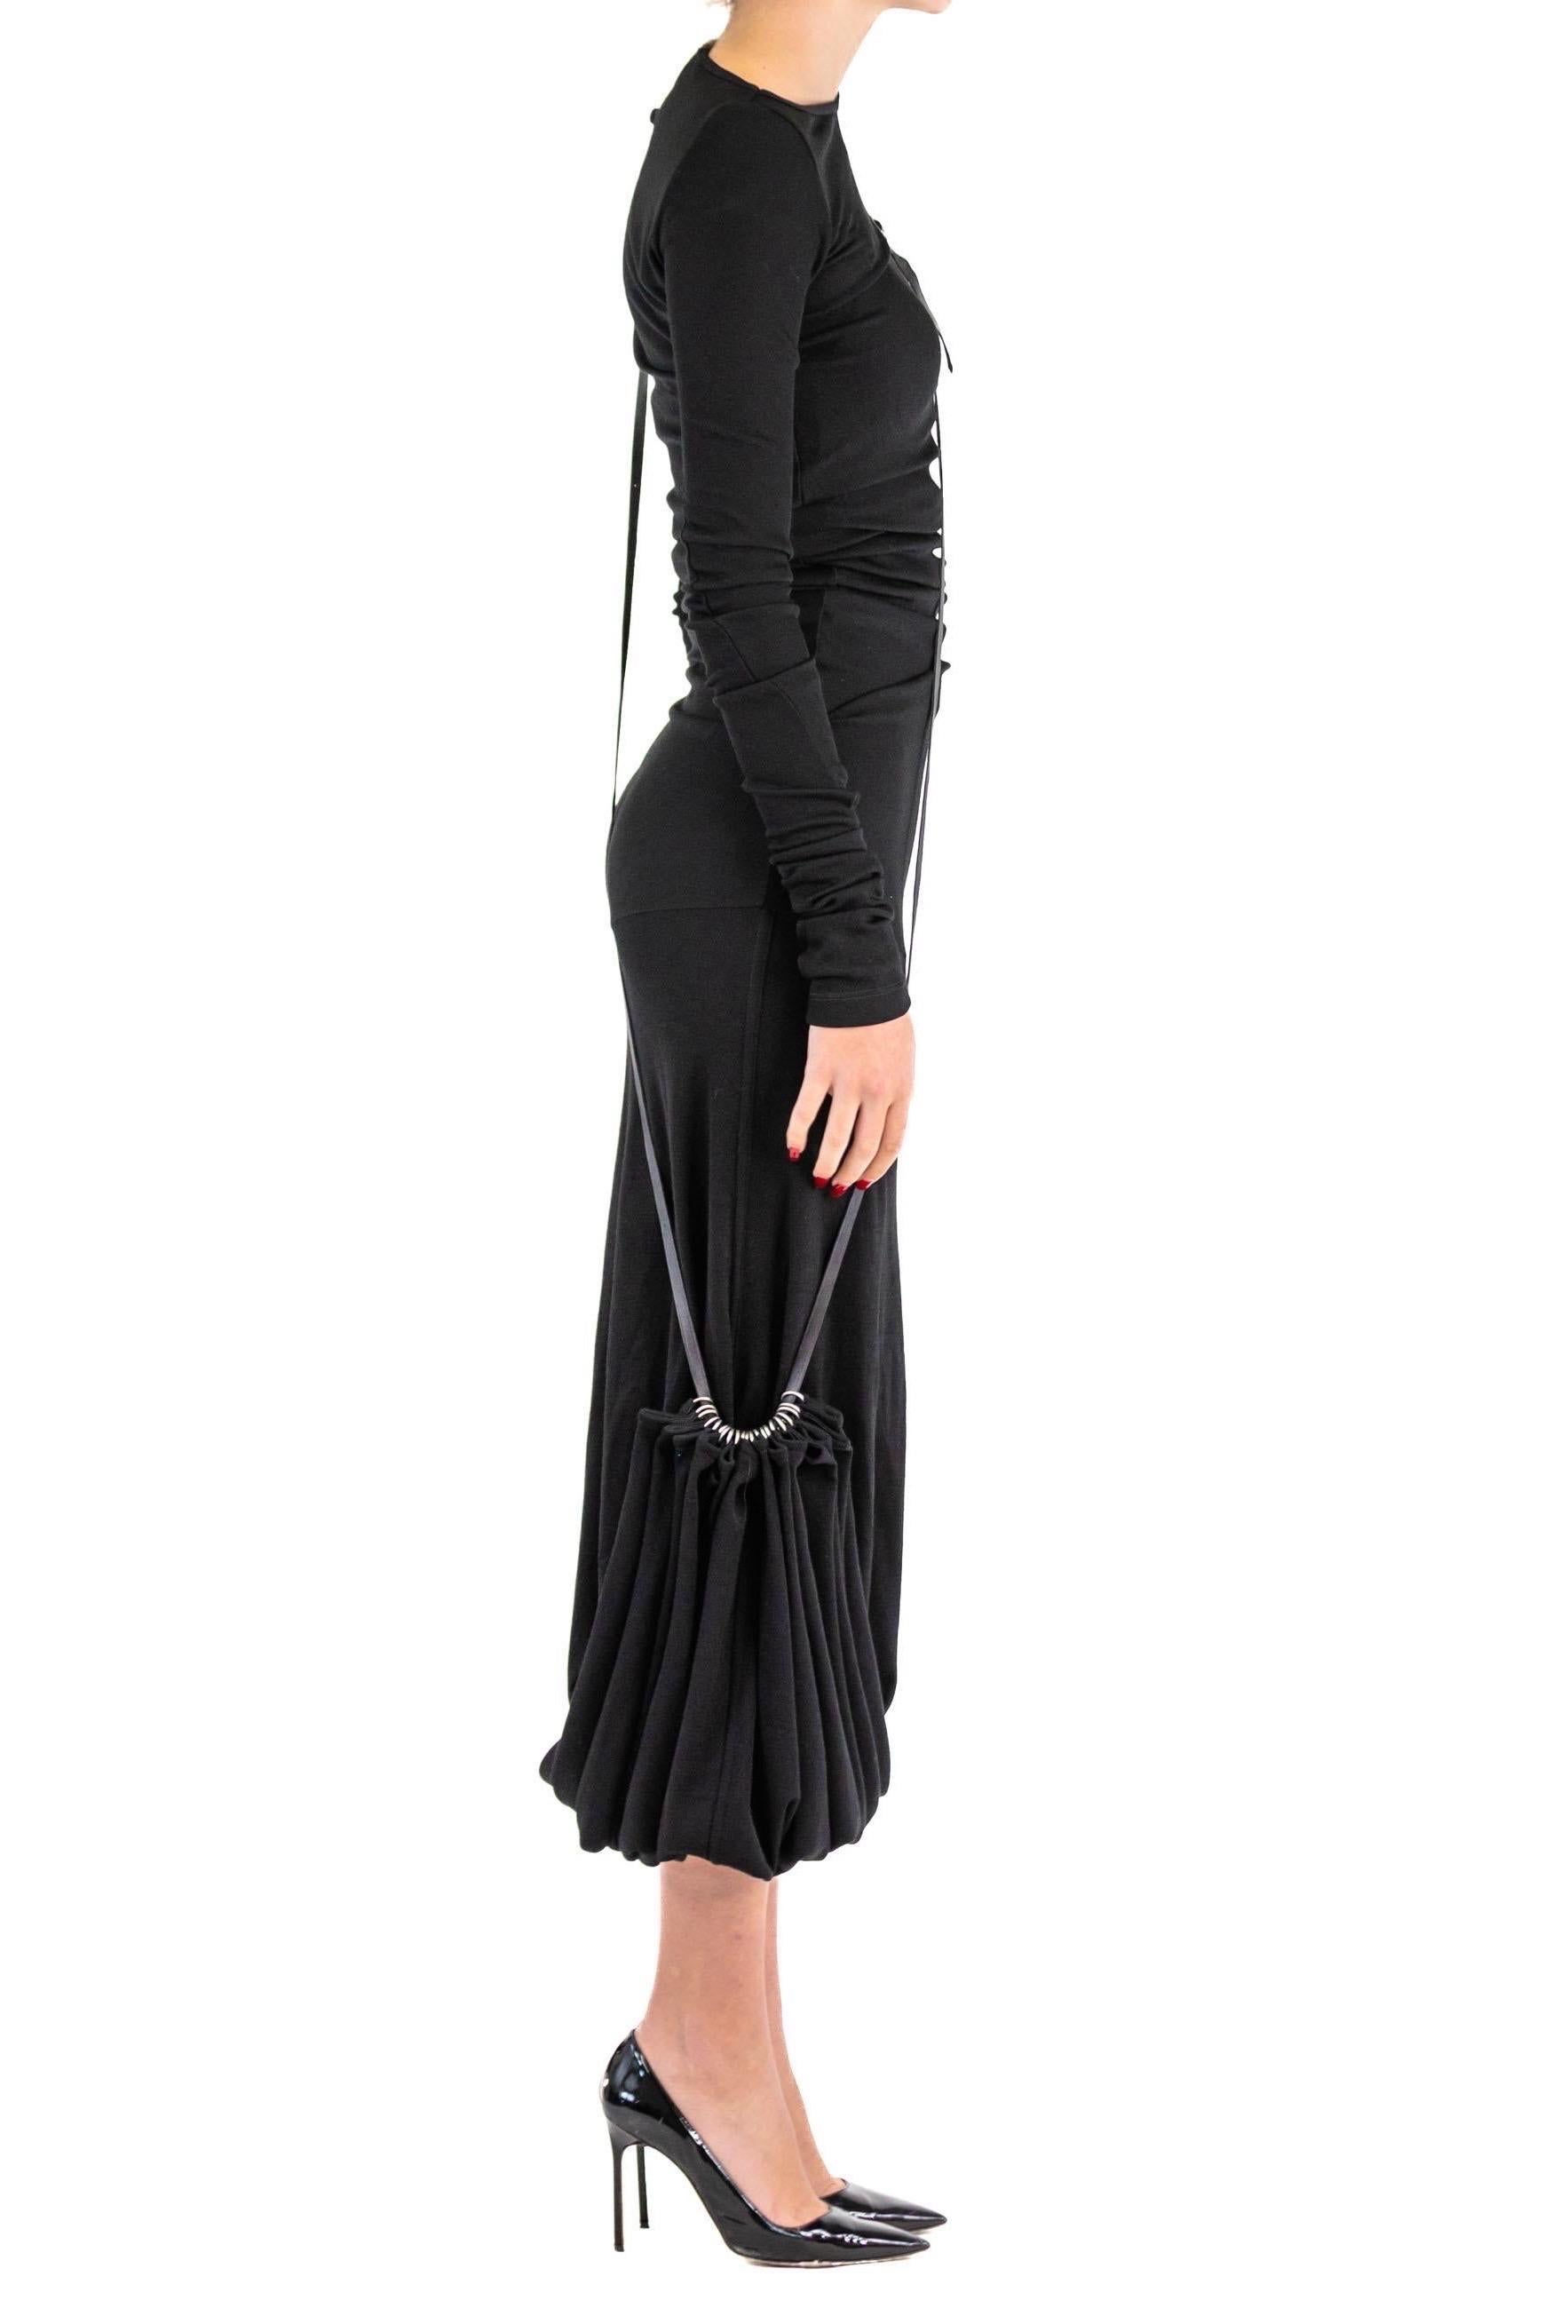 1990S JEAN PAUL GAULTIER Black Wool Blend Knit Dress With Draped Sash For Sale 1